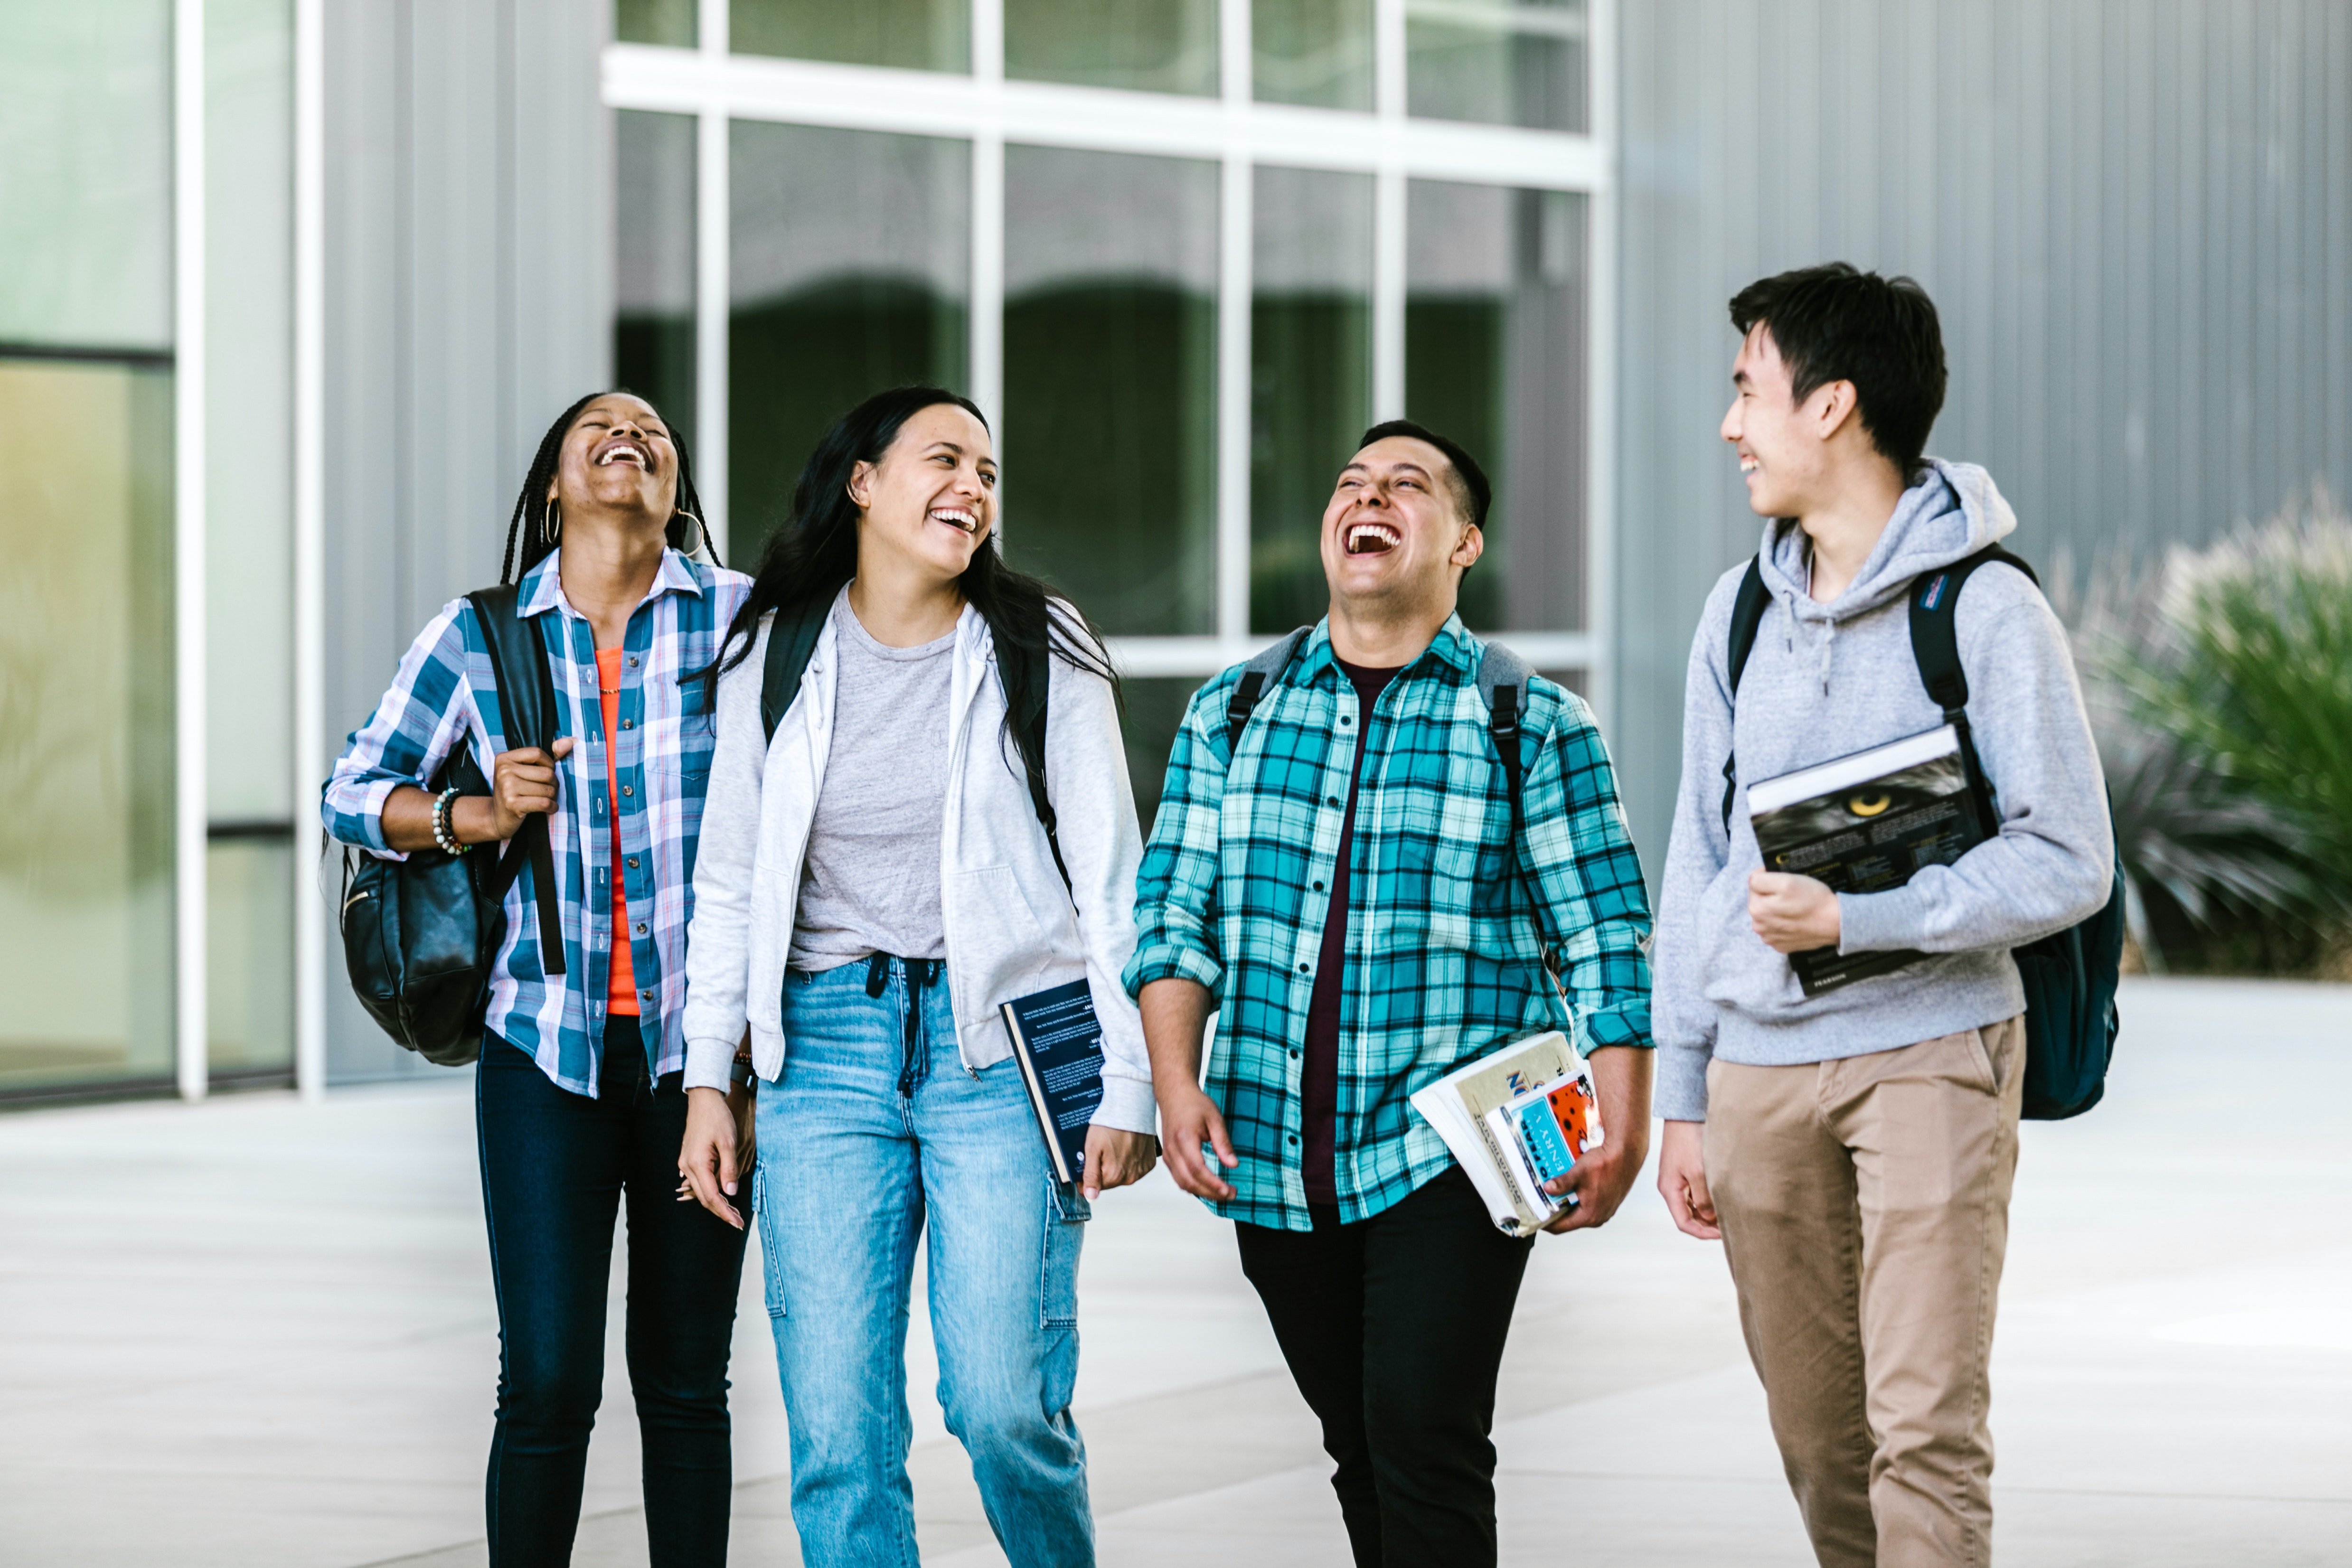 A group of students laughing | Photo: Pexels